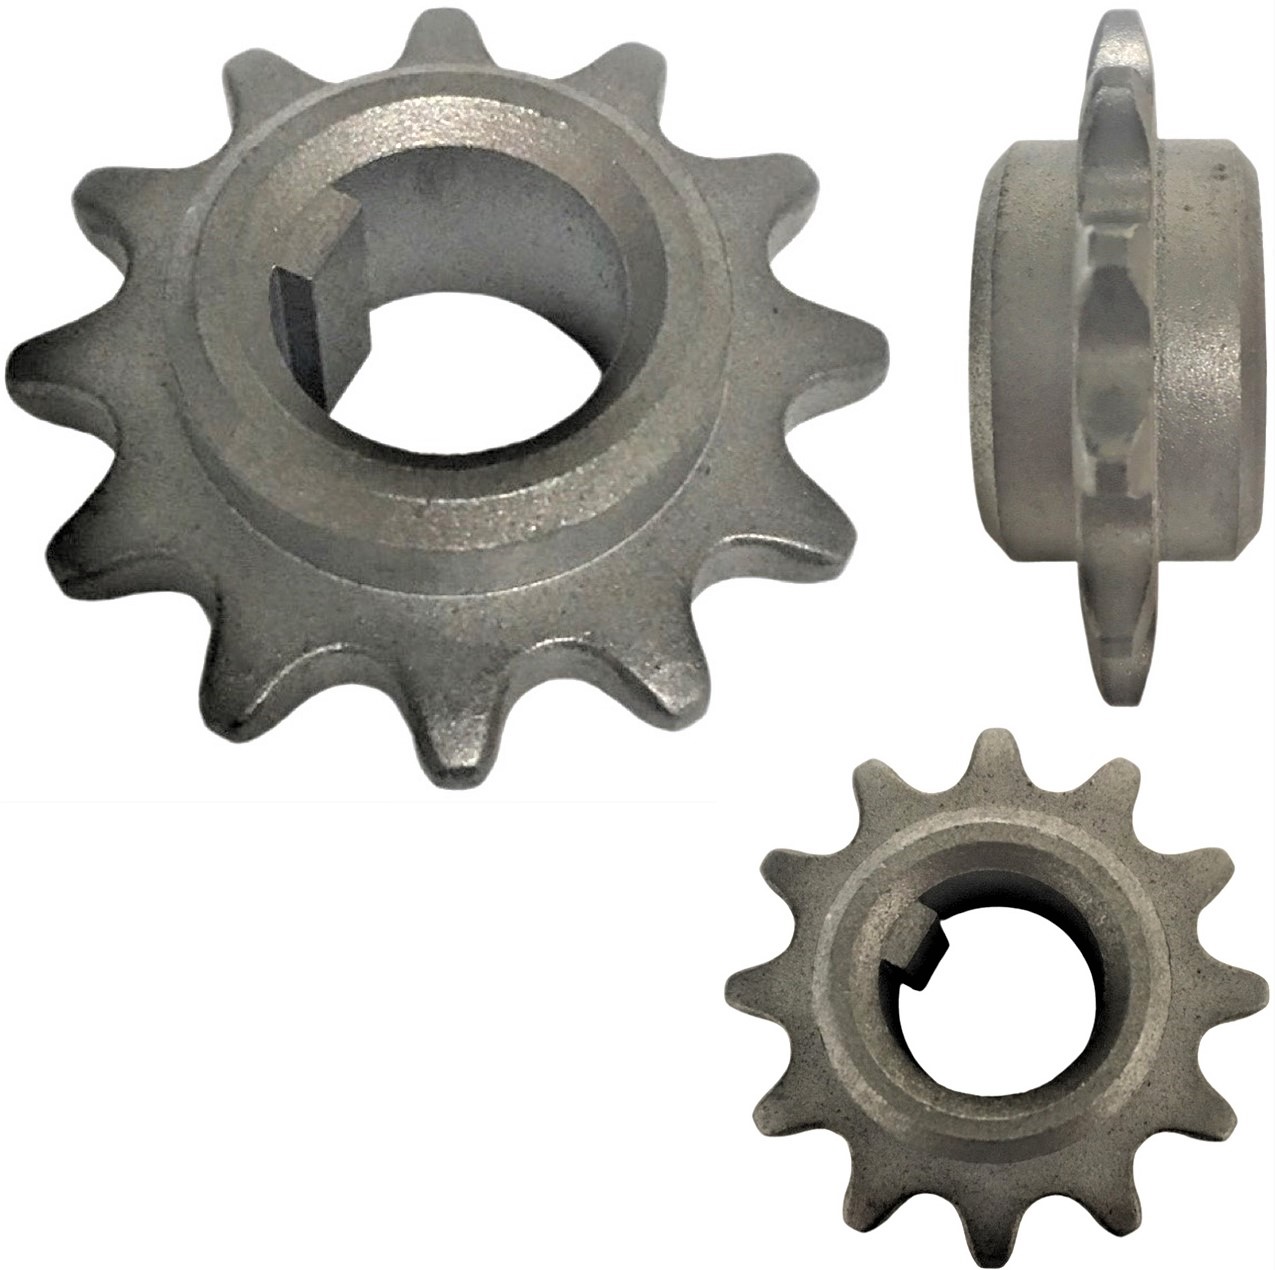 Front Sprocket #35 12th ID=16mm Width=16mm